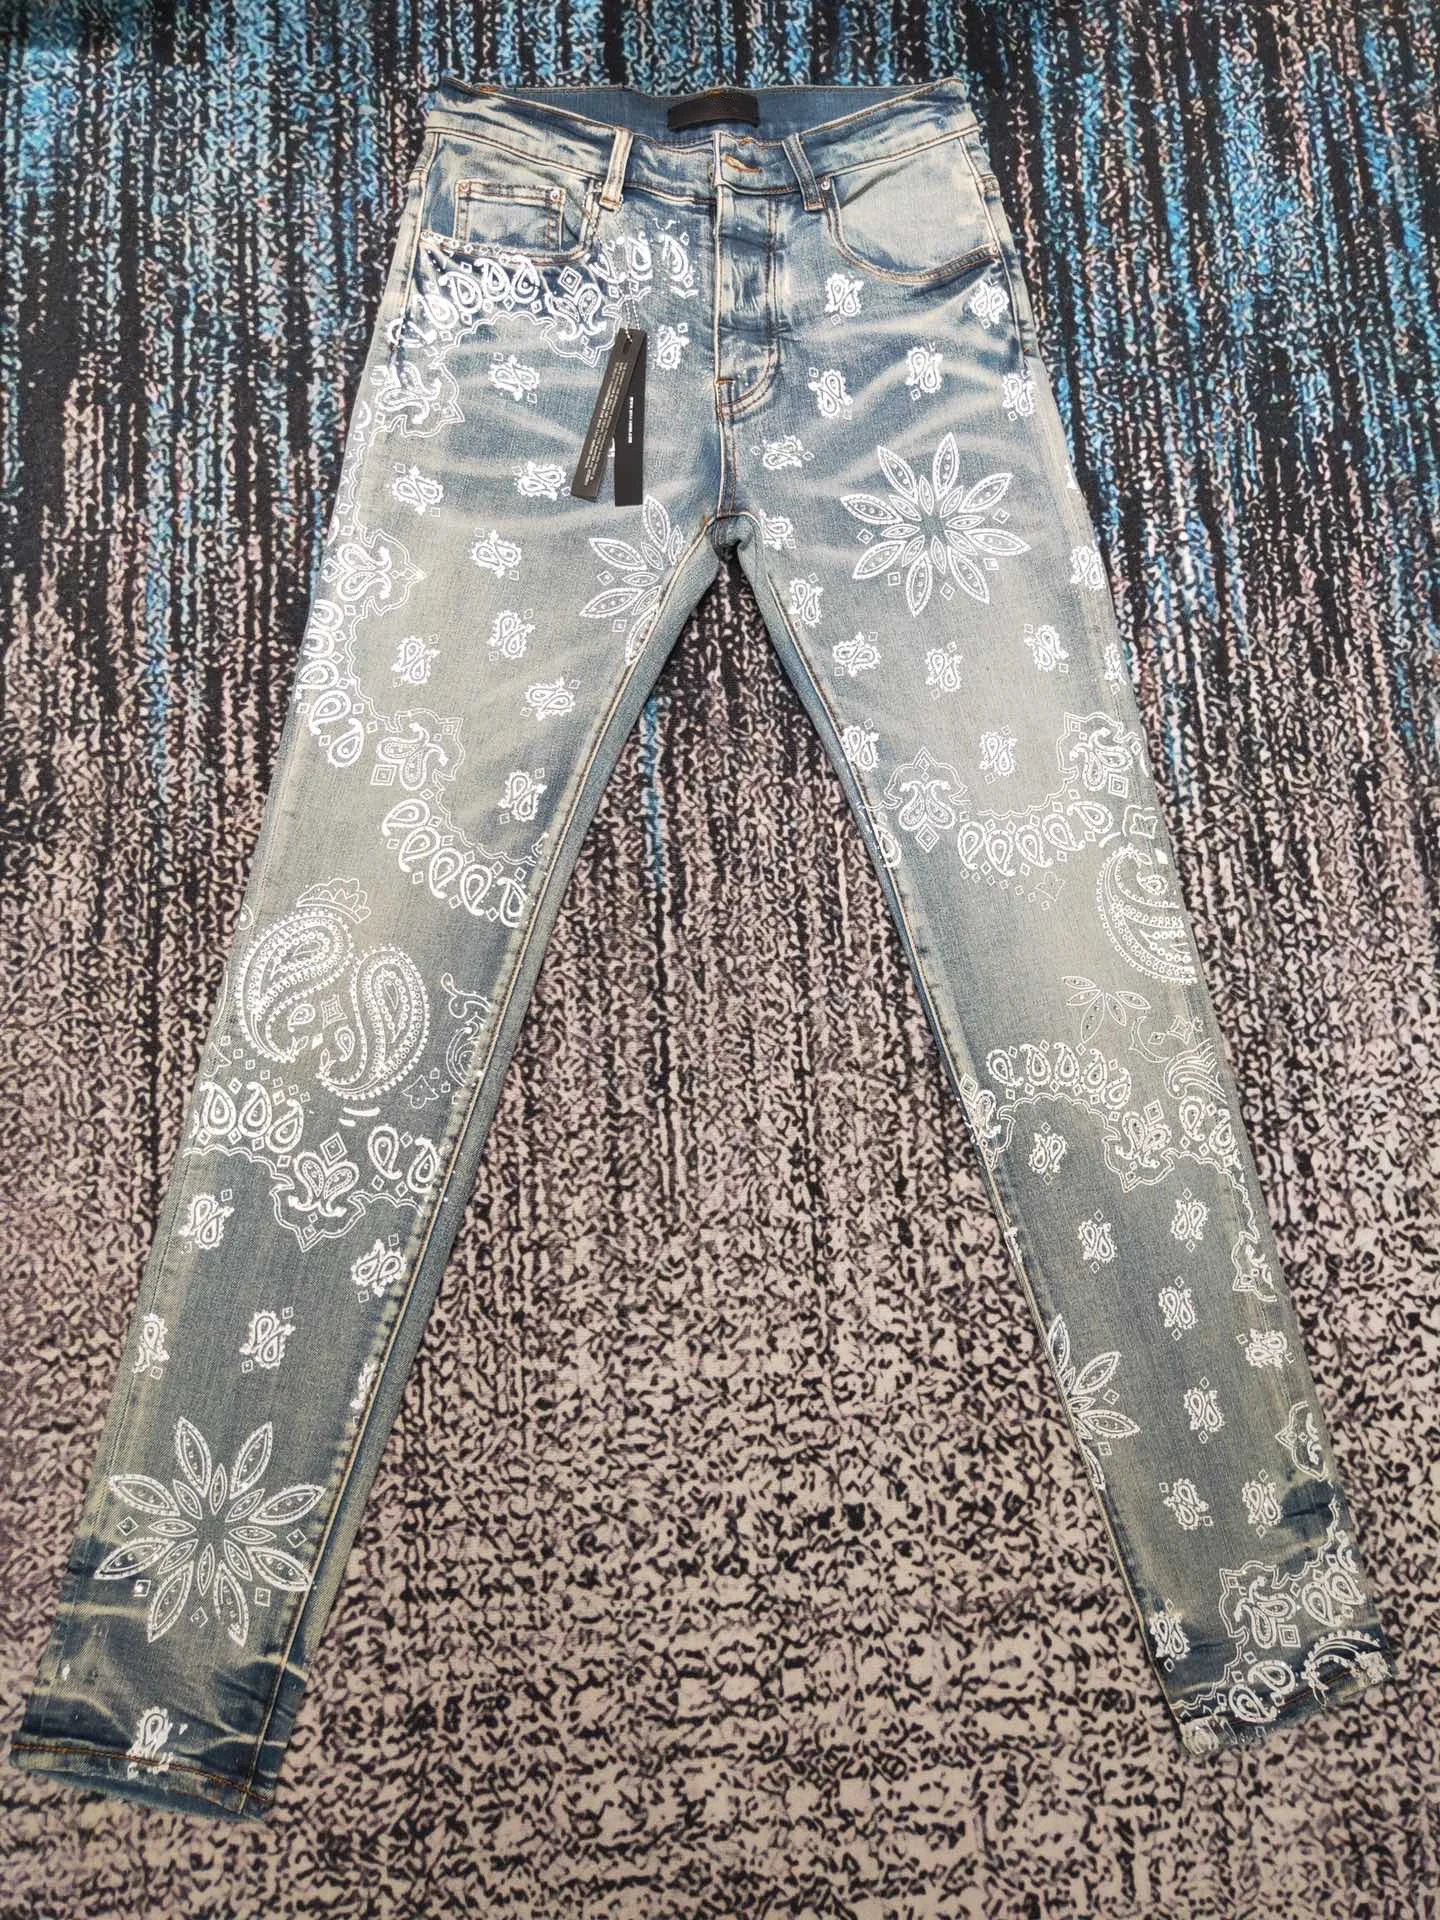 New style jeans high street cashew flower print floral sparkle band diamonds do old fashion wash jeans man